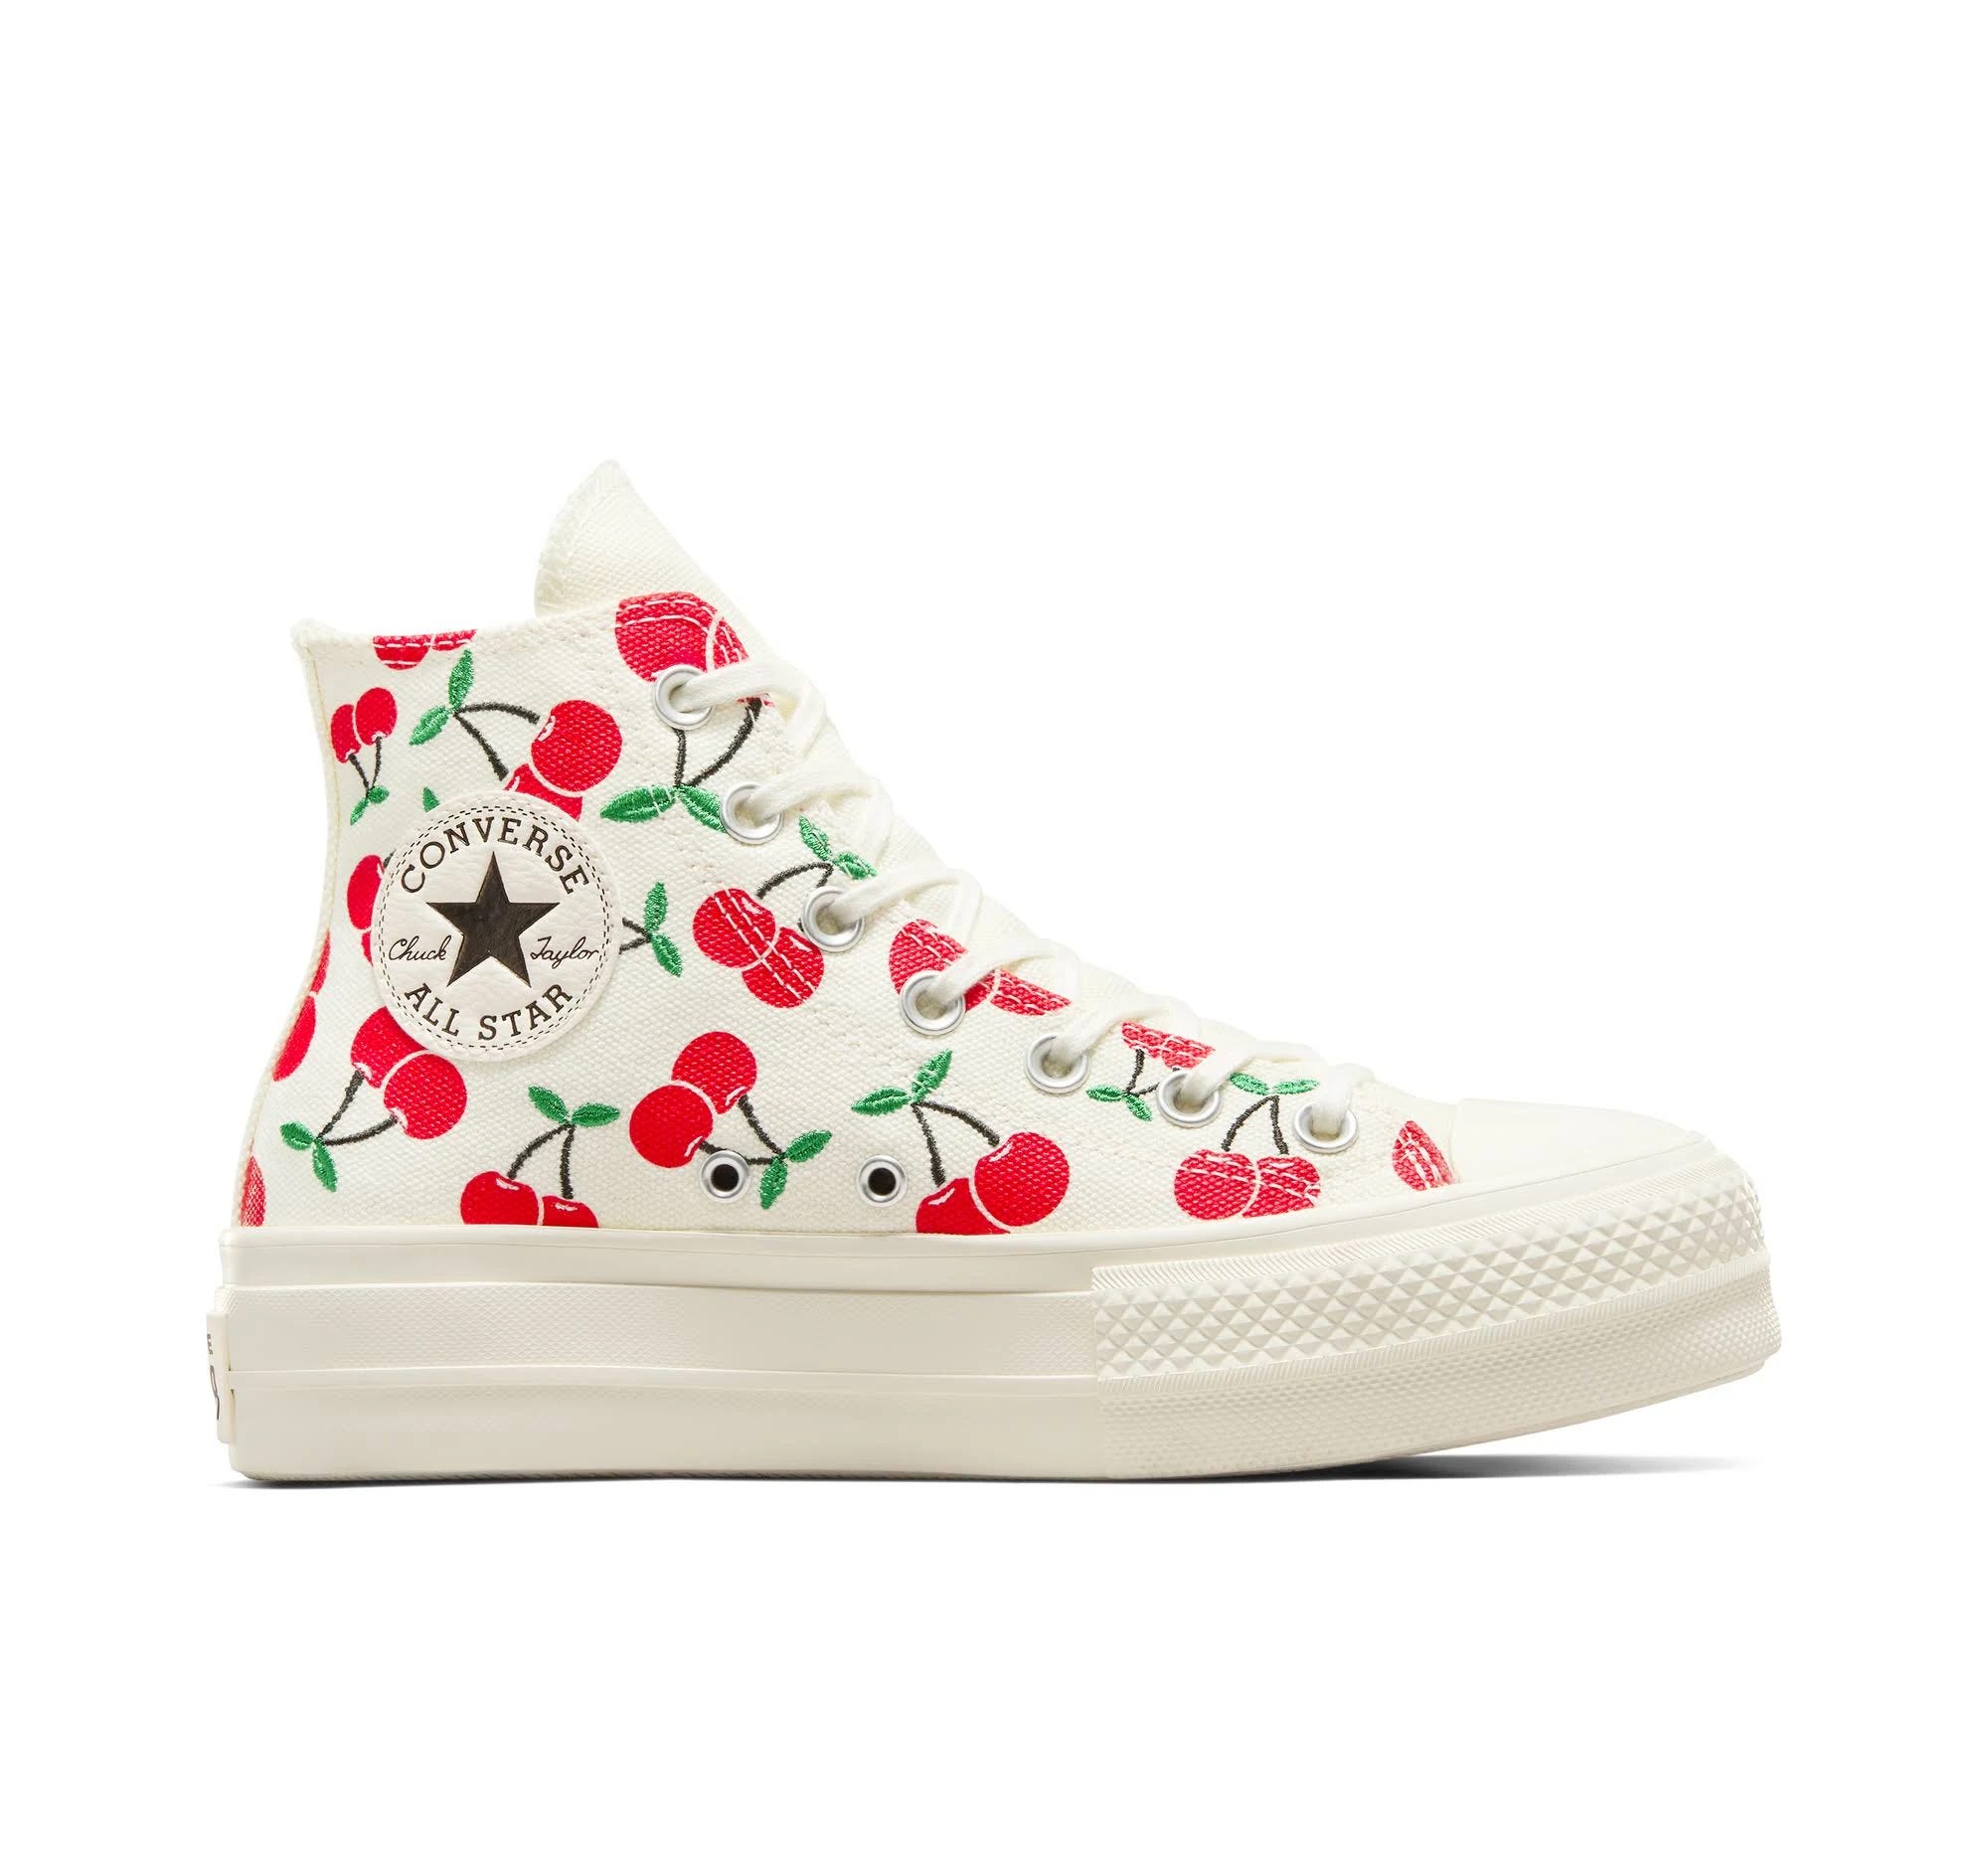 Chuck Taylor All Star Platform Fashion High-Top with Cherry Graphics | Image